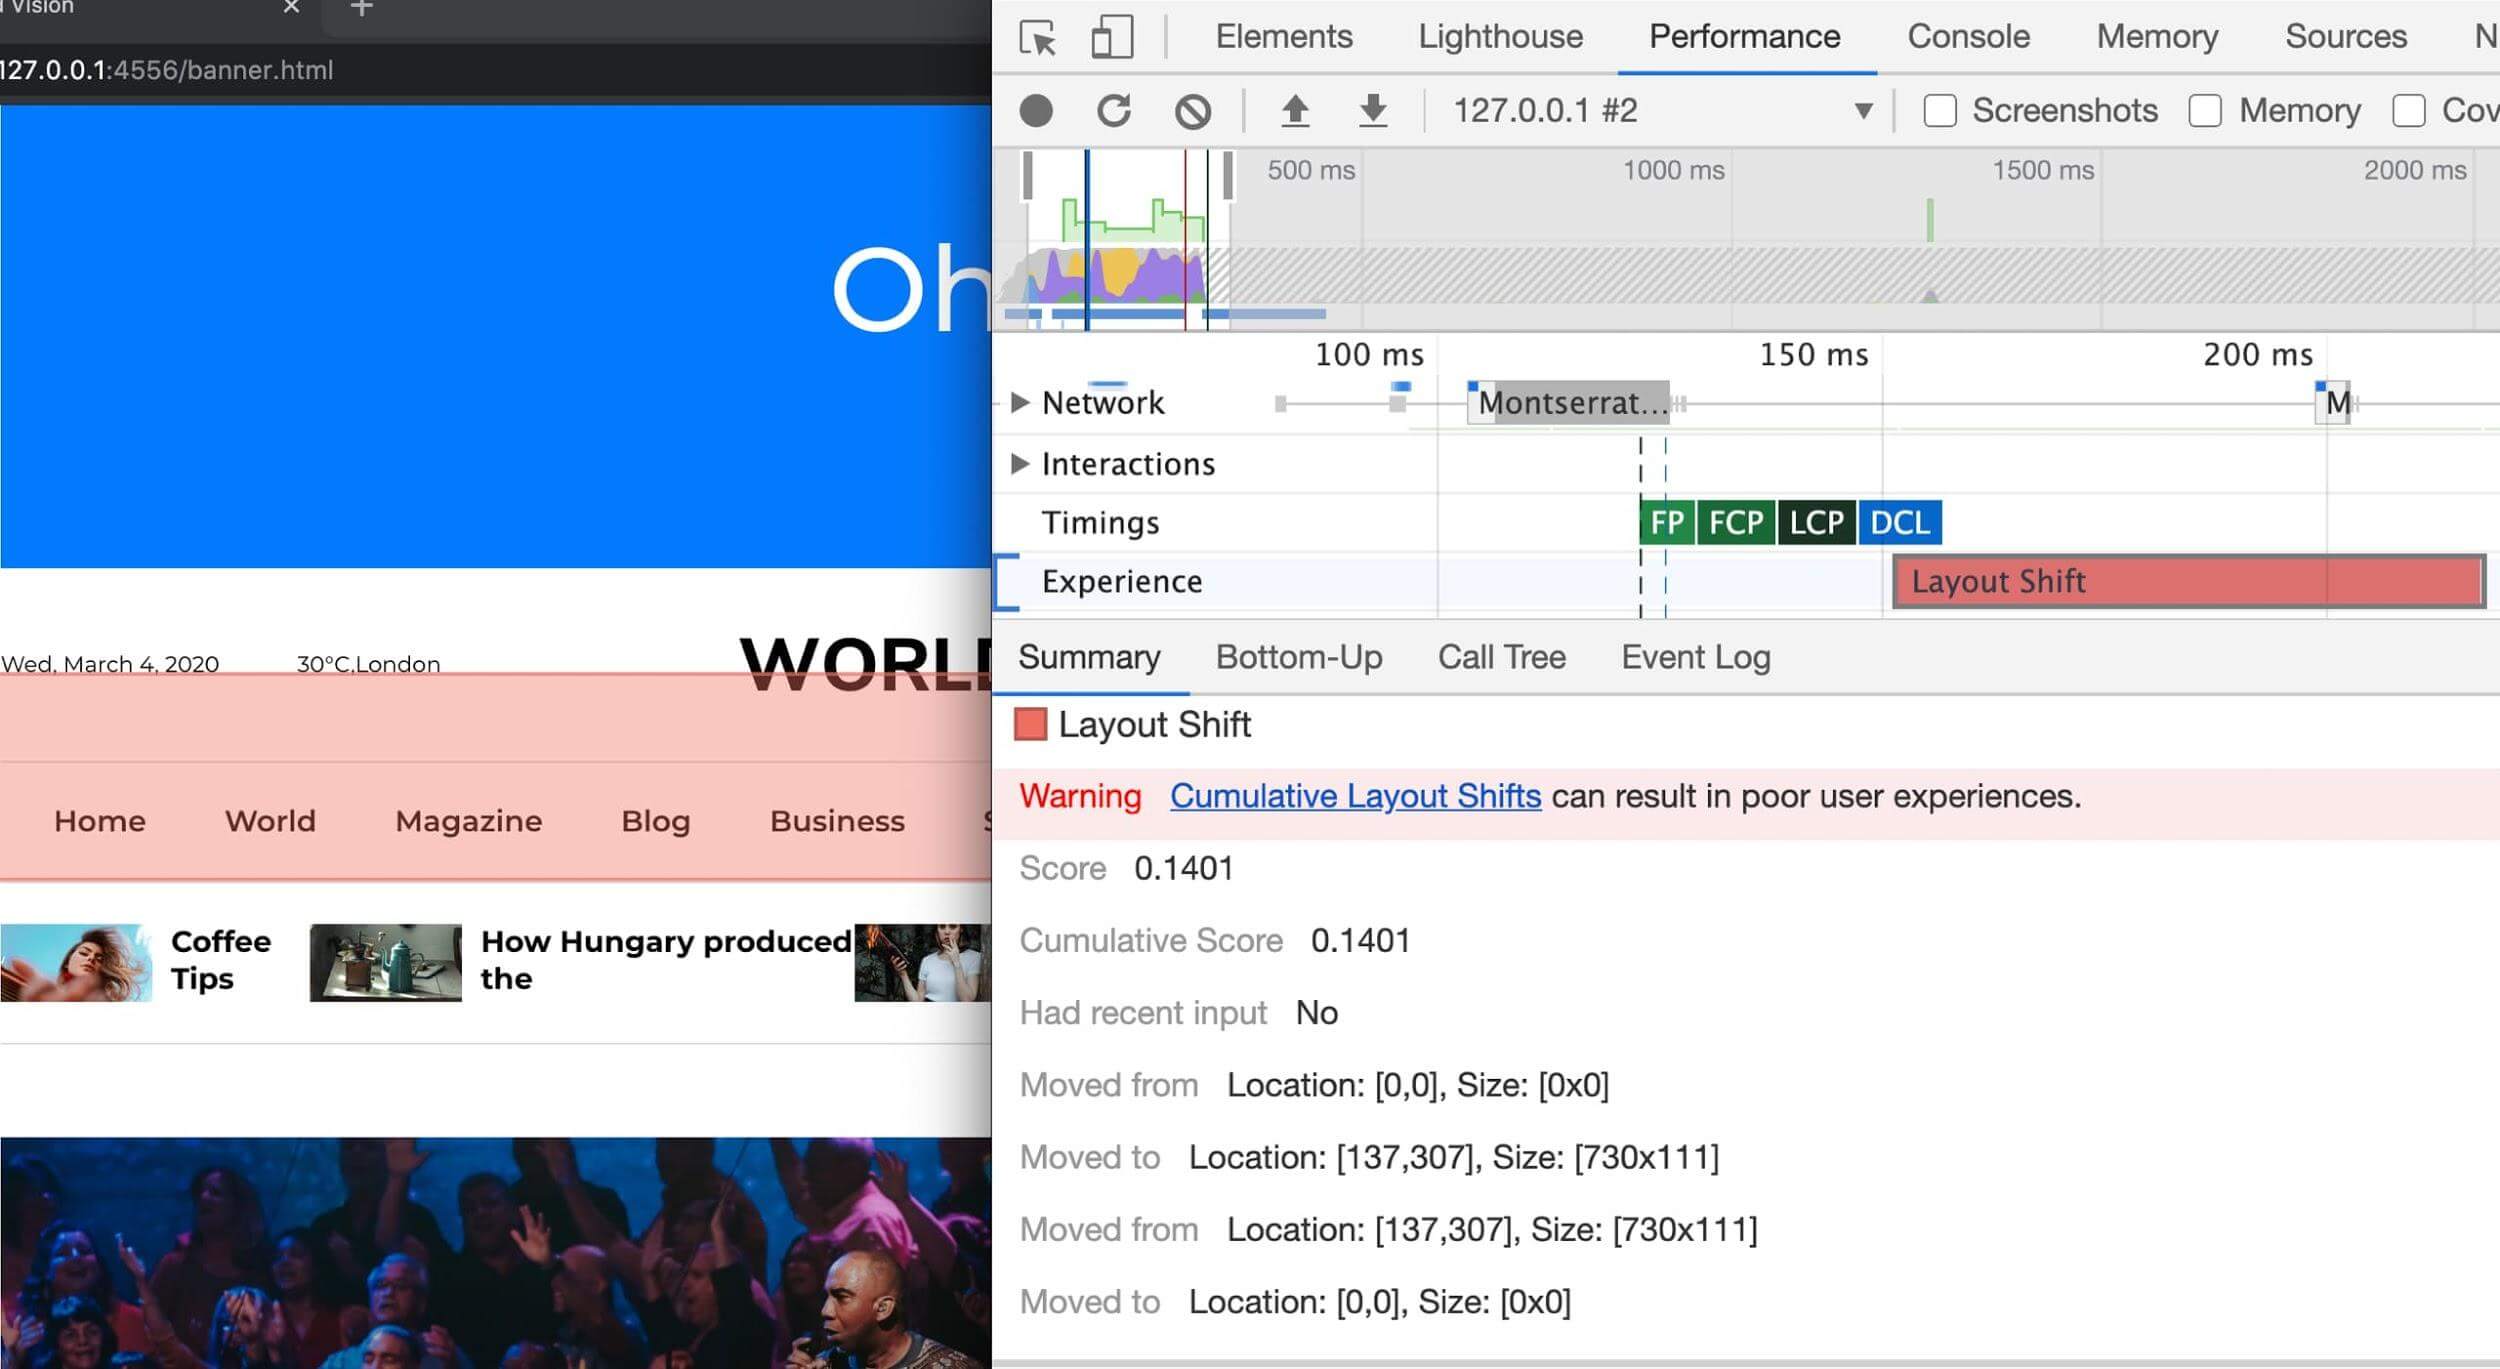 Layout Shift records being displayed in the Chrome DevTools performance panel when expanding the Experience section